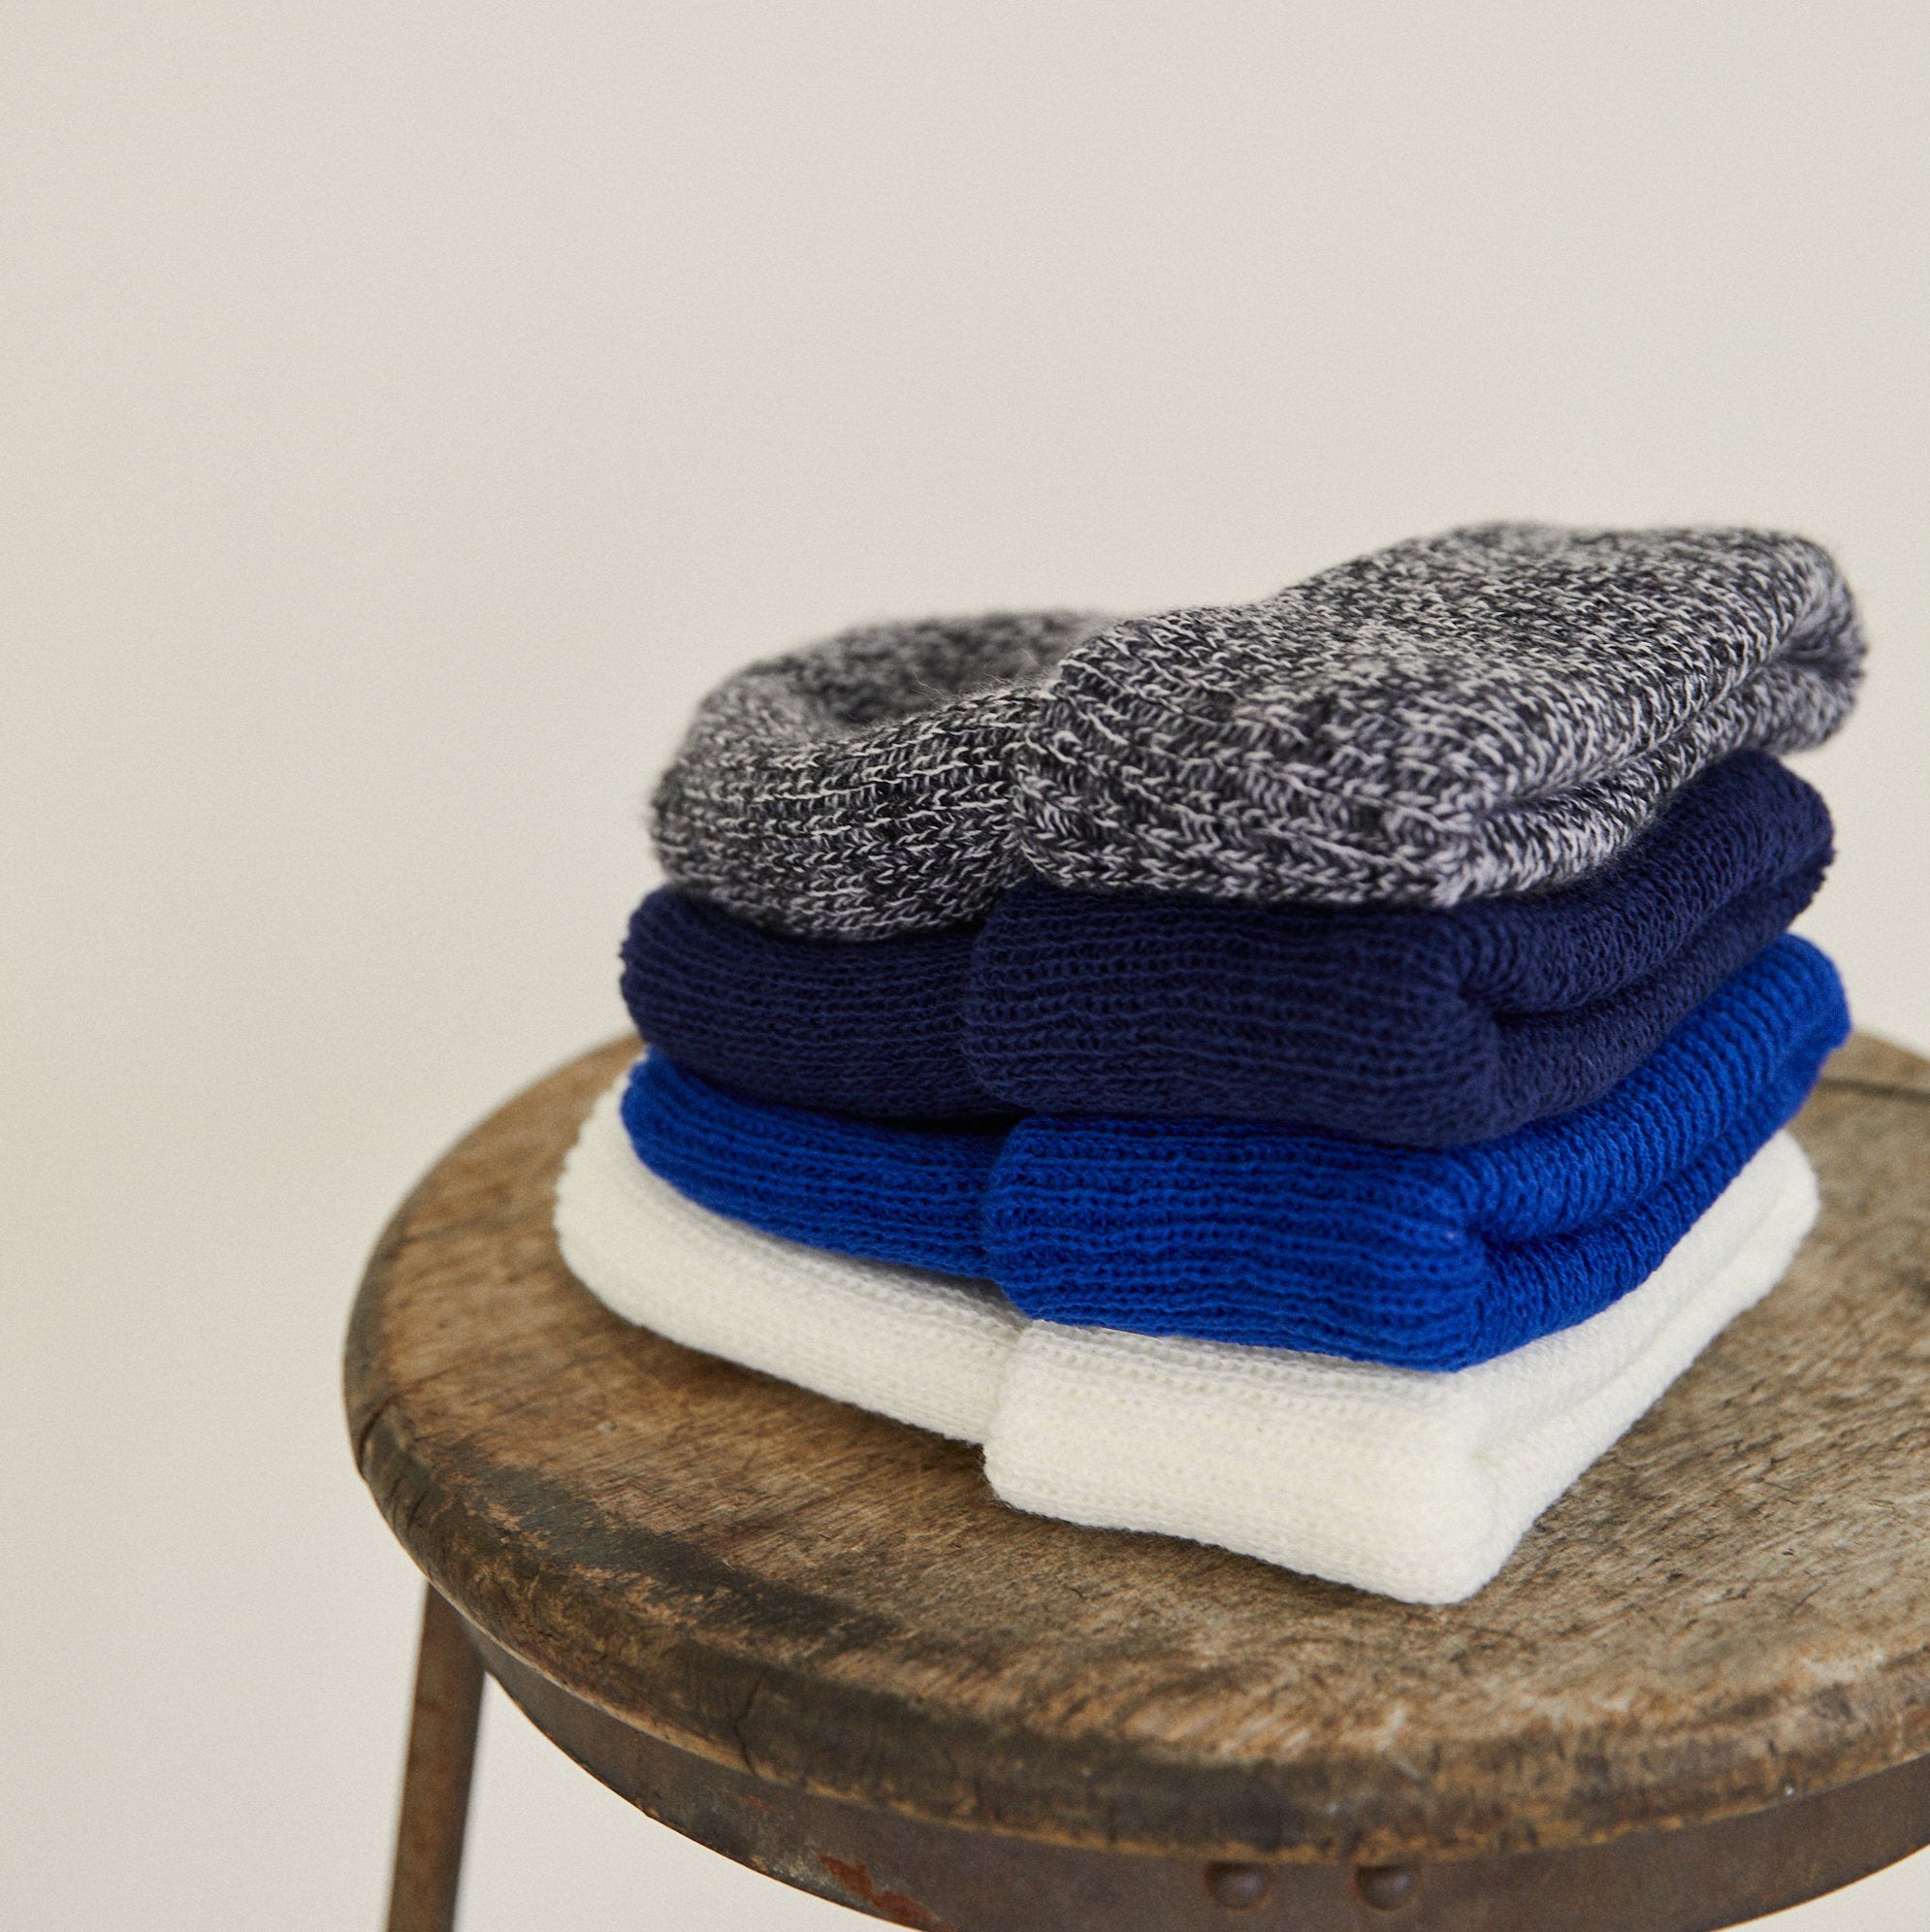 Knits – Yellow 108 | Sustainable Headwear + Accessories